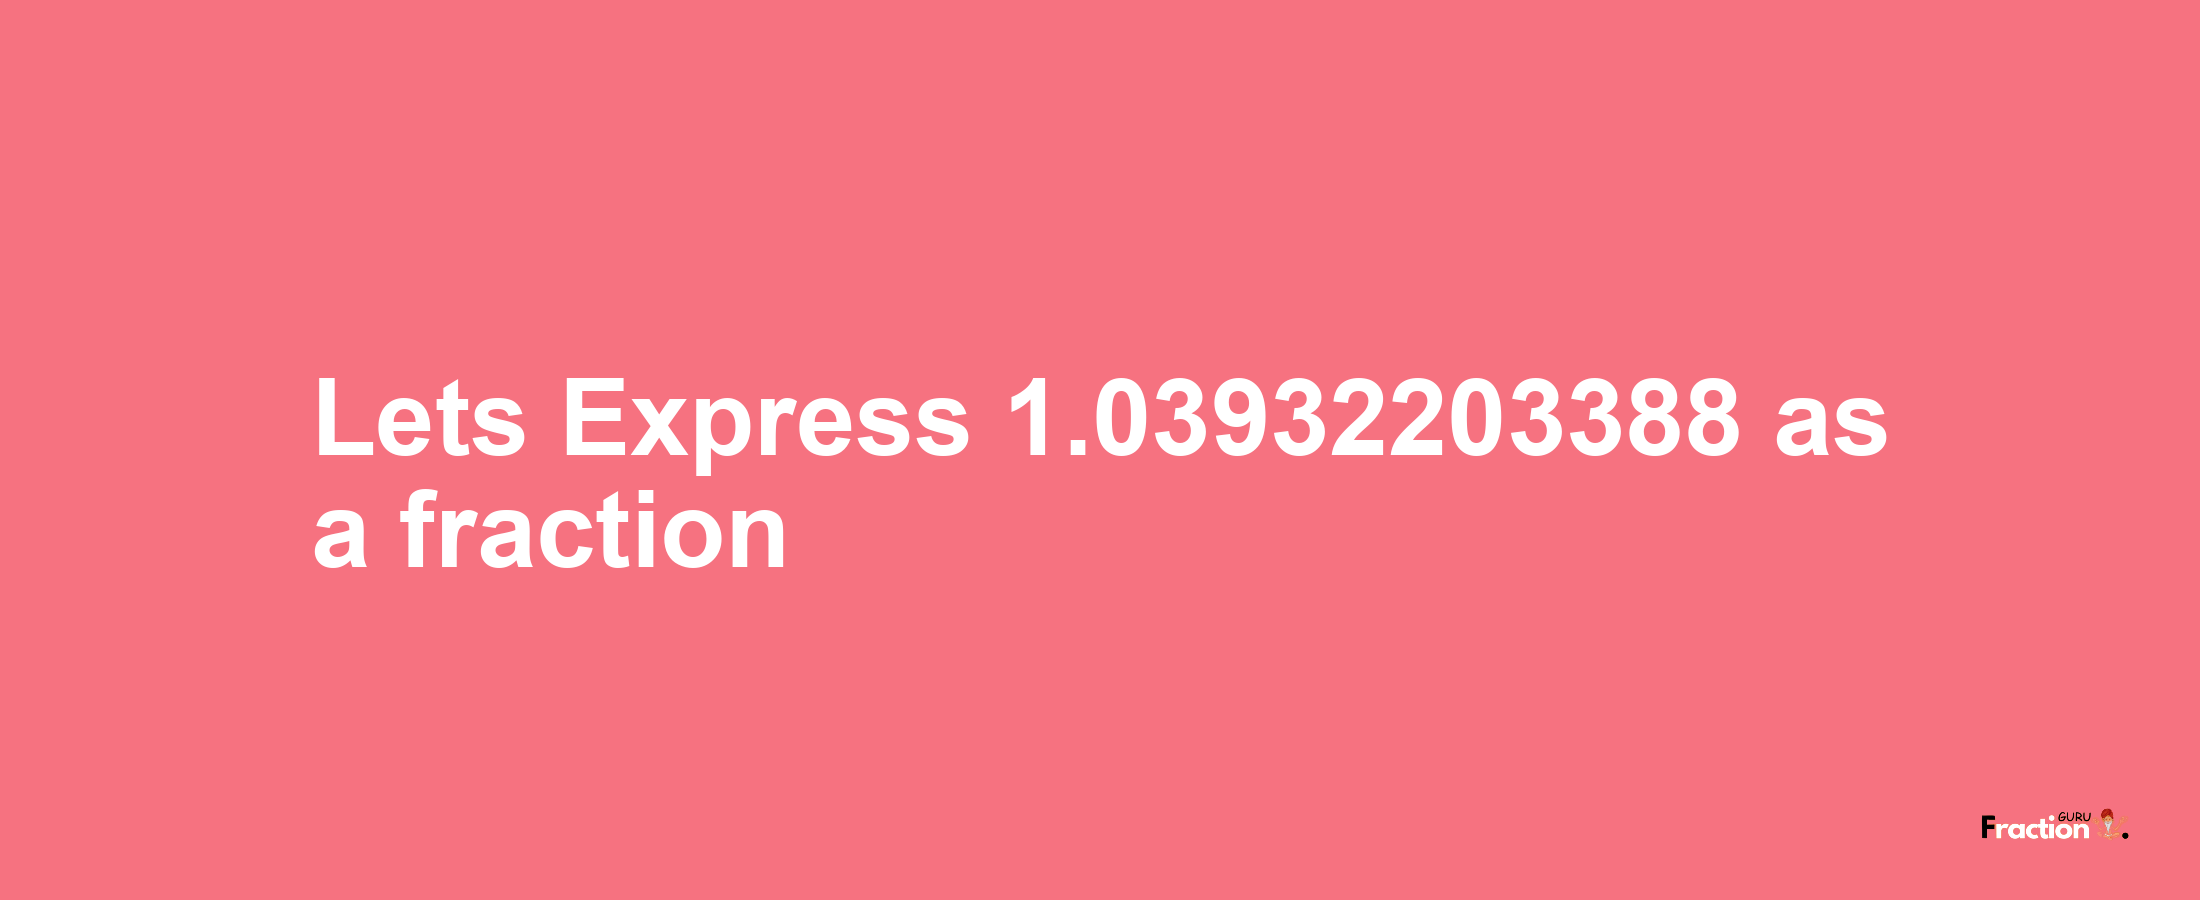 Lets Express 1.03932203388 as afraction